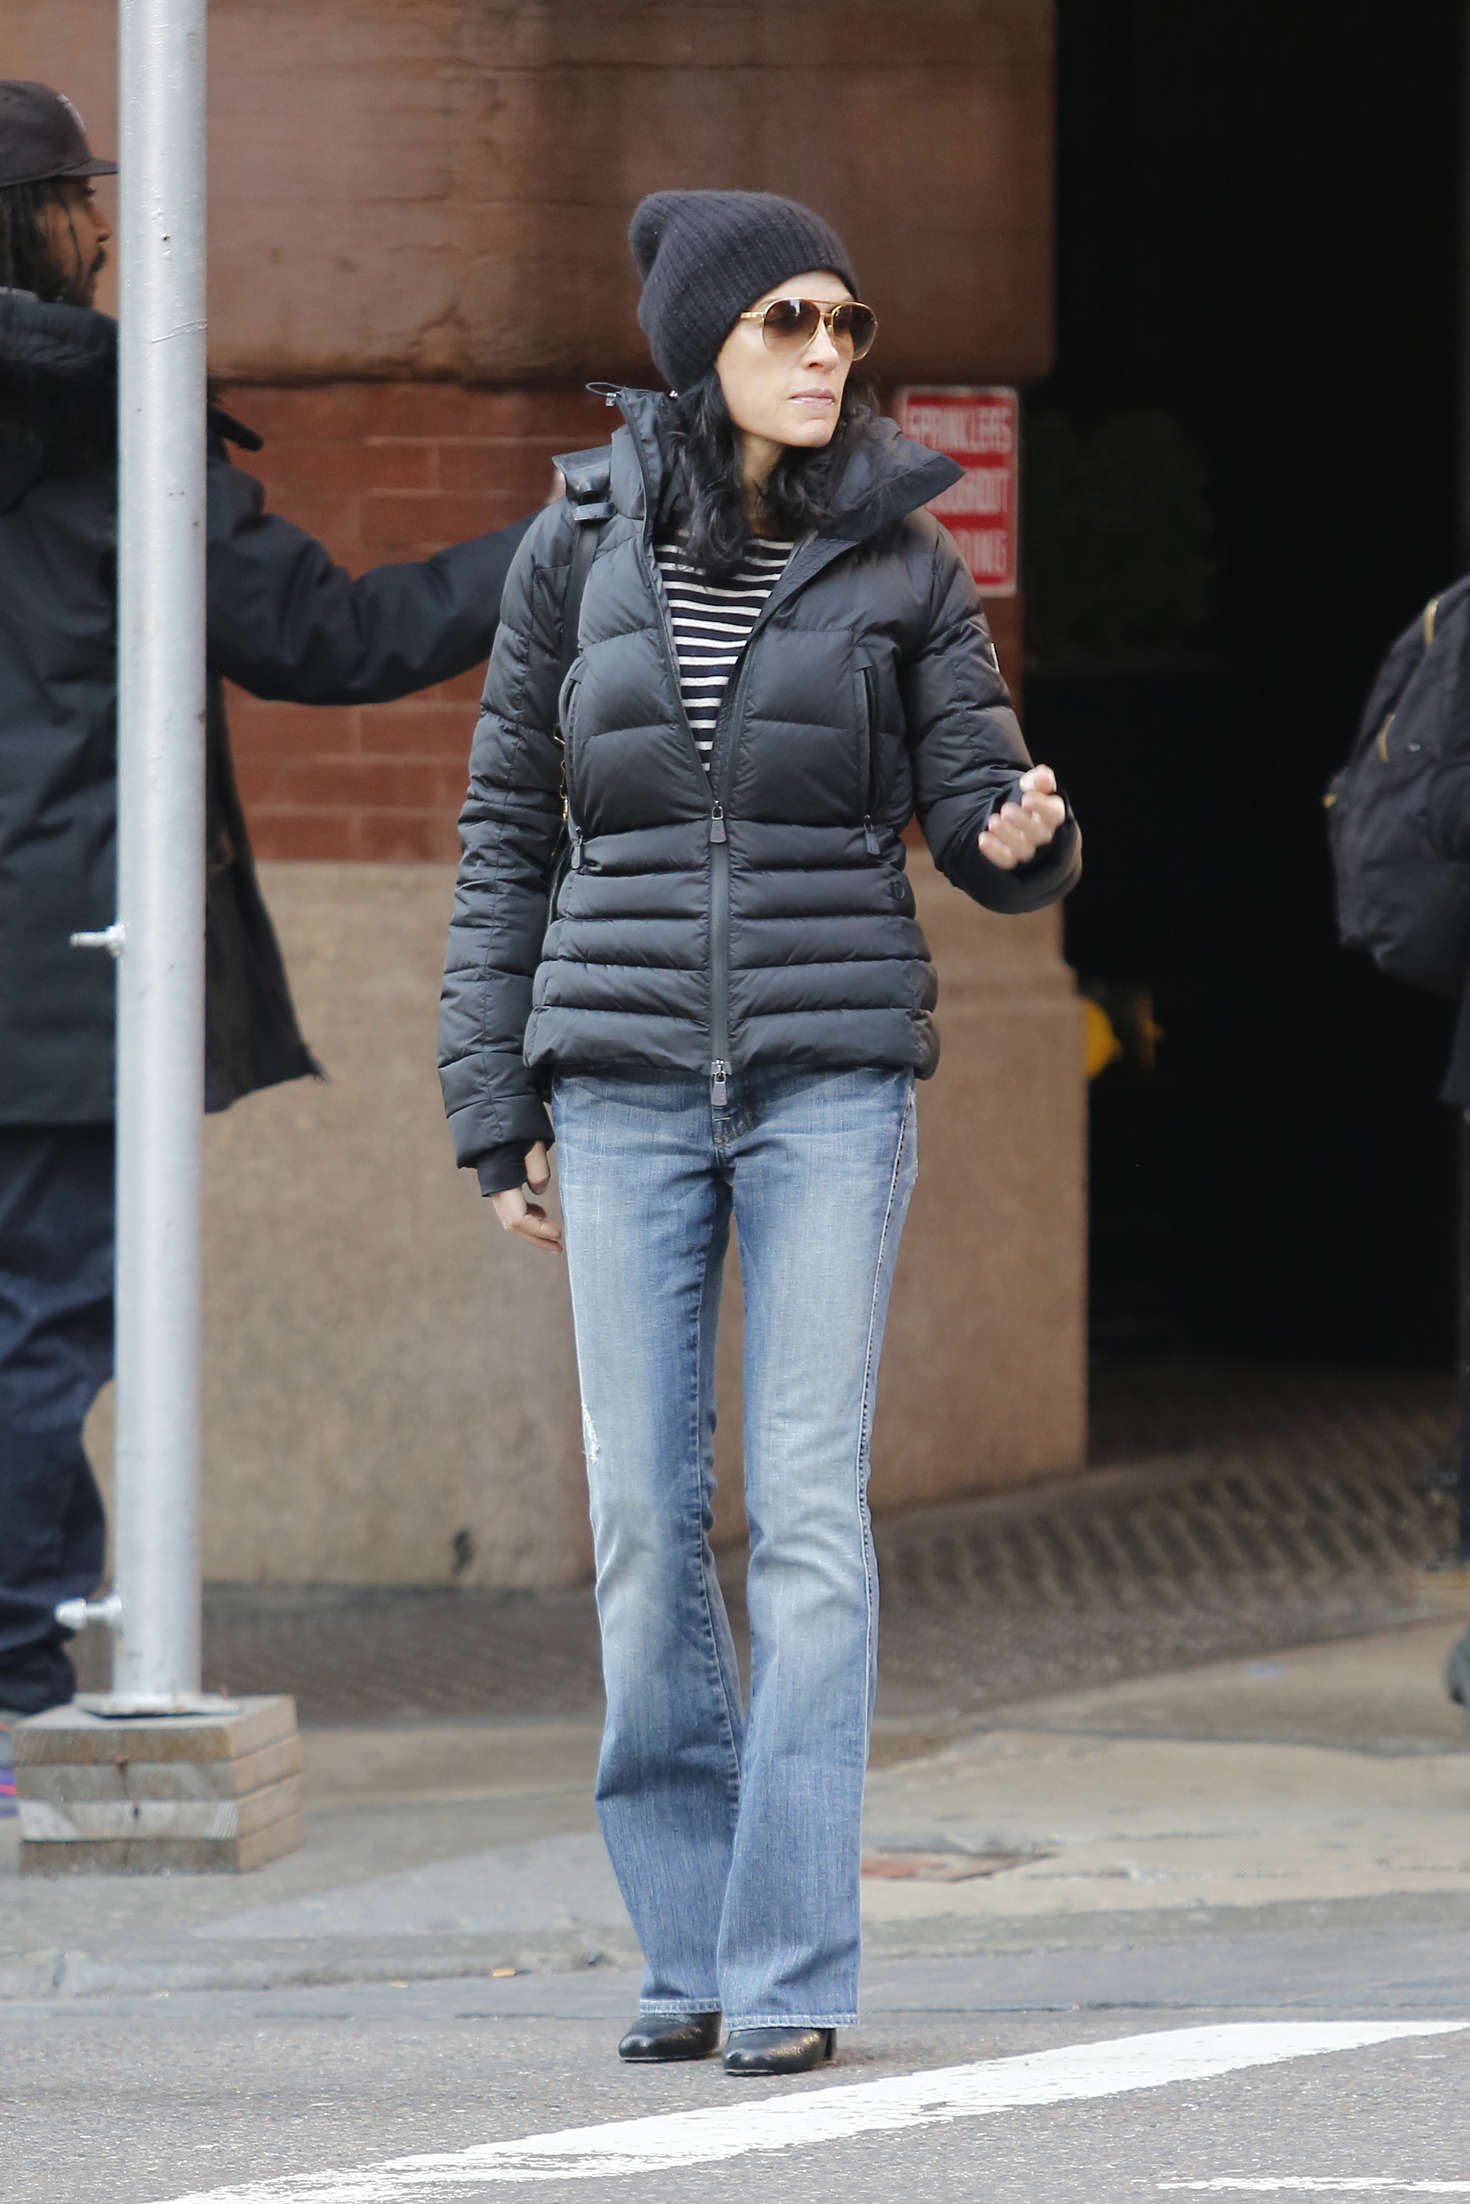 Julianna Margulies in jeans heads to the spa -04 | GotCeleb